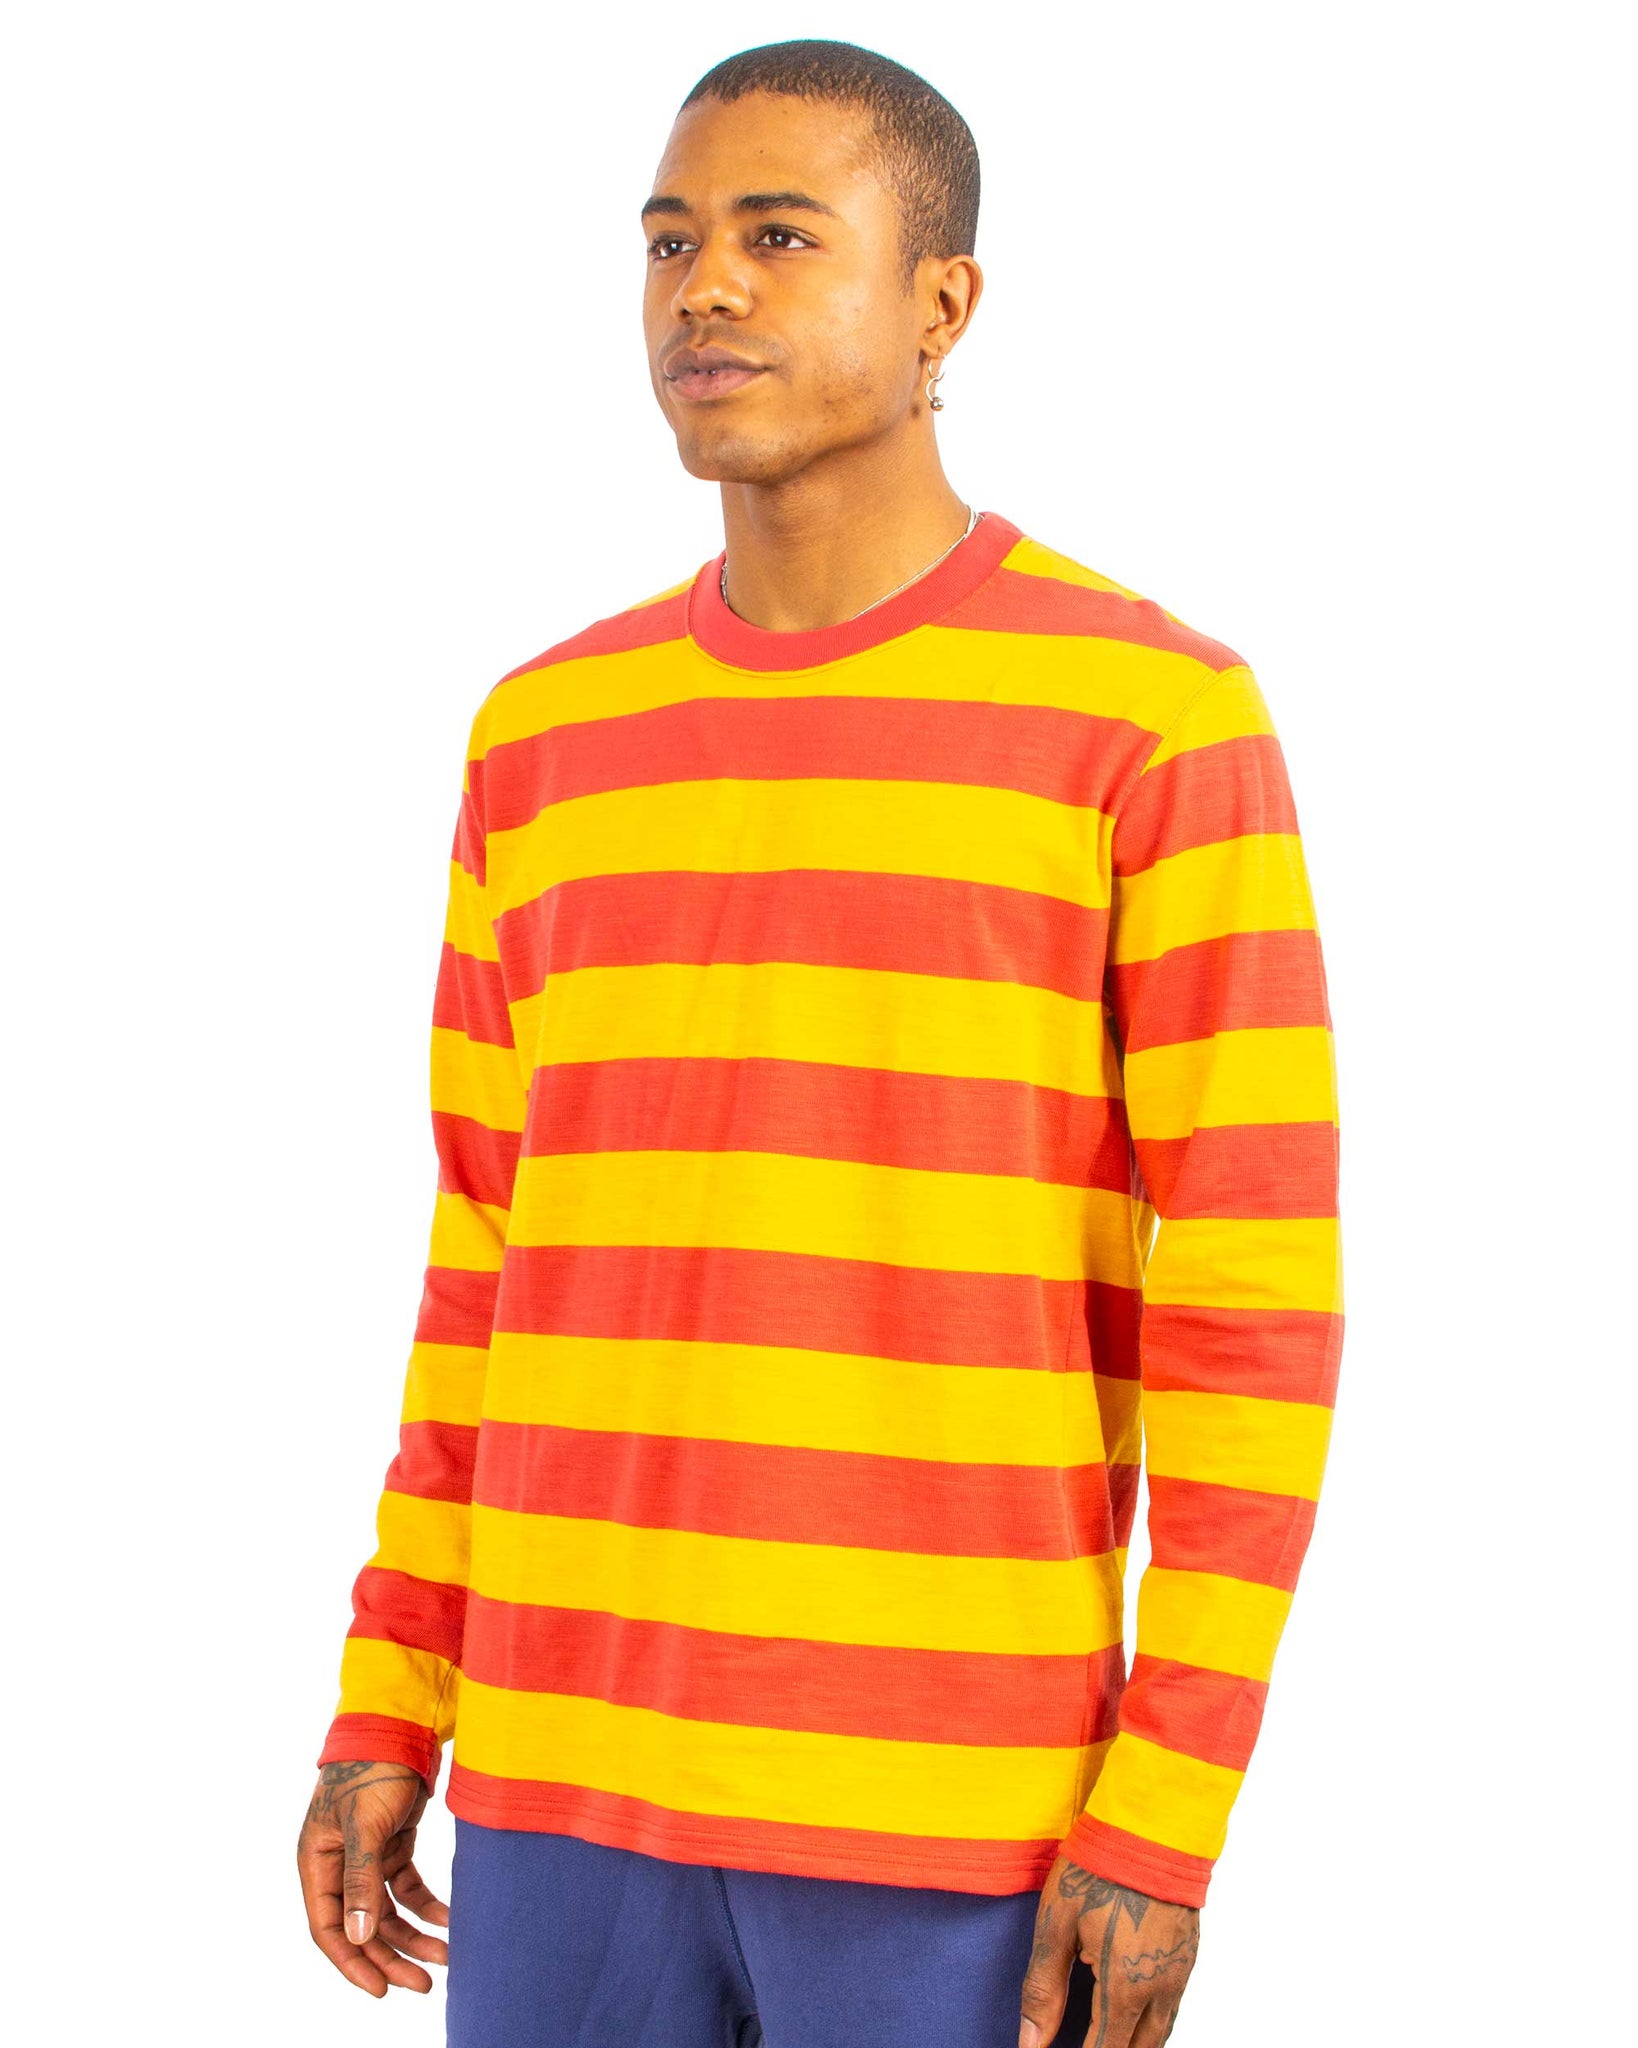 The Real McCoy's BC22005 Buco Stripe Tee L/S Salmon Close